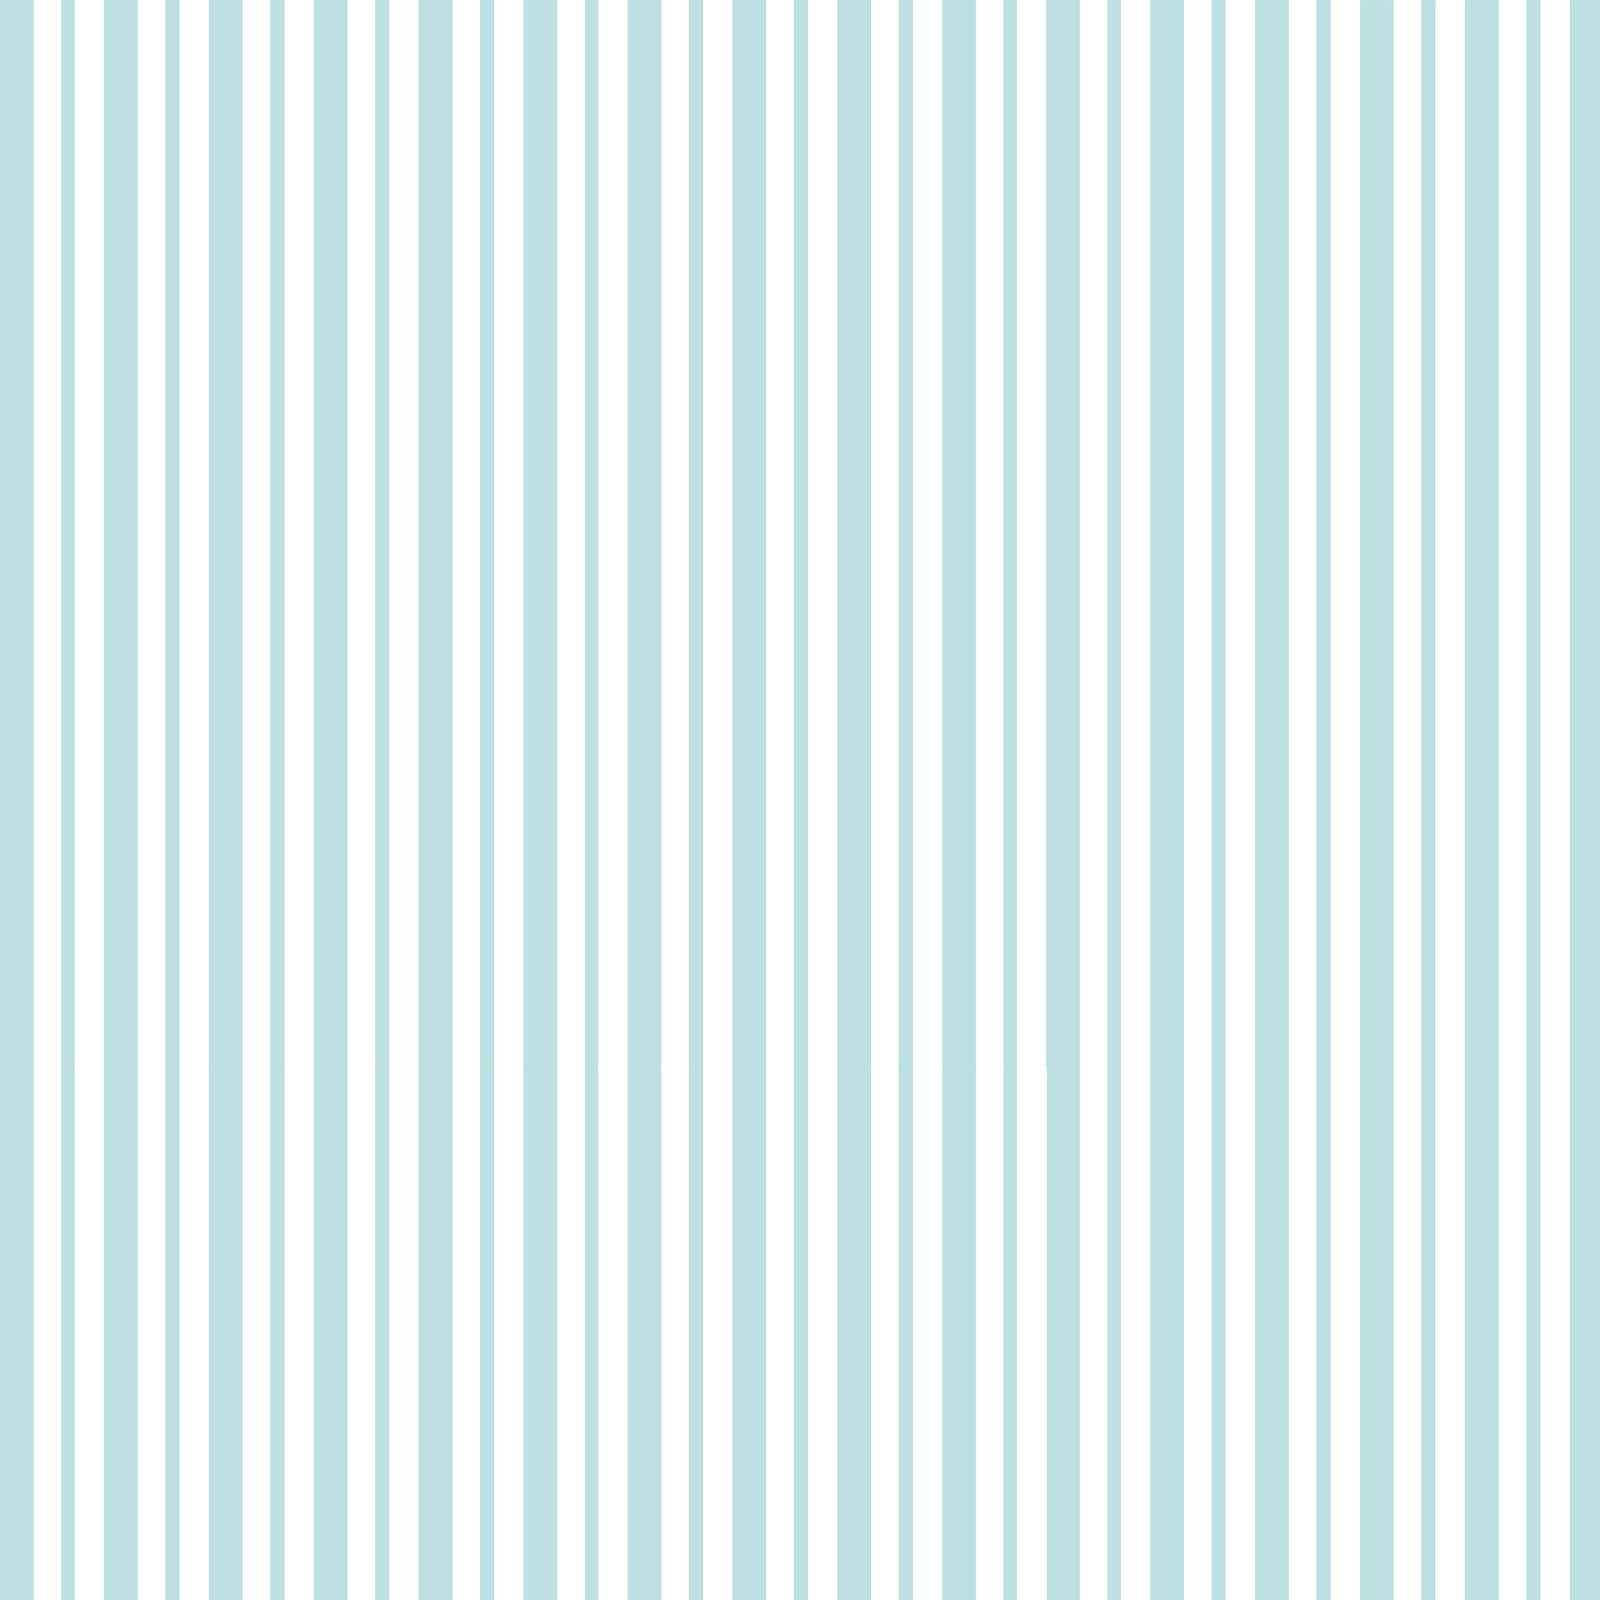 Mini Awning Stripe in aqua (MAS8249-Q) is part of the Kimberbell Basics line designed by Kim Christopherson for Maywood Studio. This fabric features aqua/teal stripes in two sizes on a white background, and adds a soft aqua texture to projects.